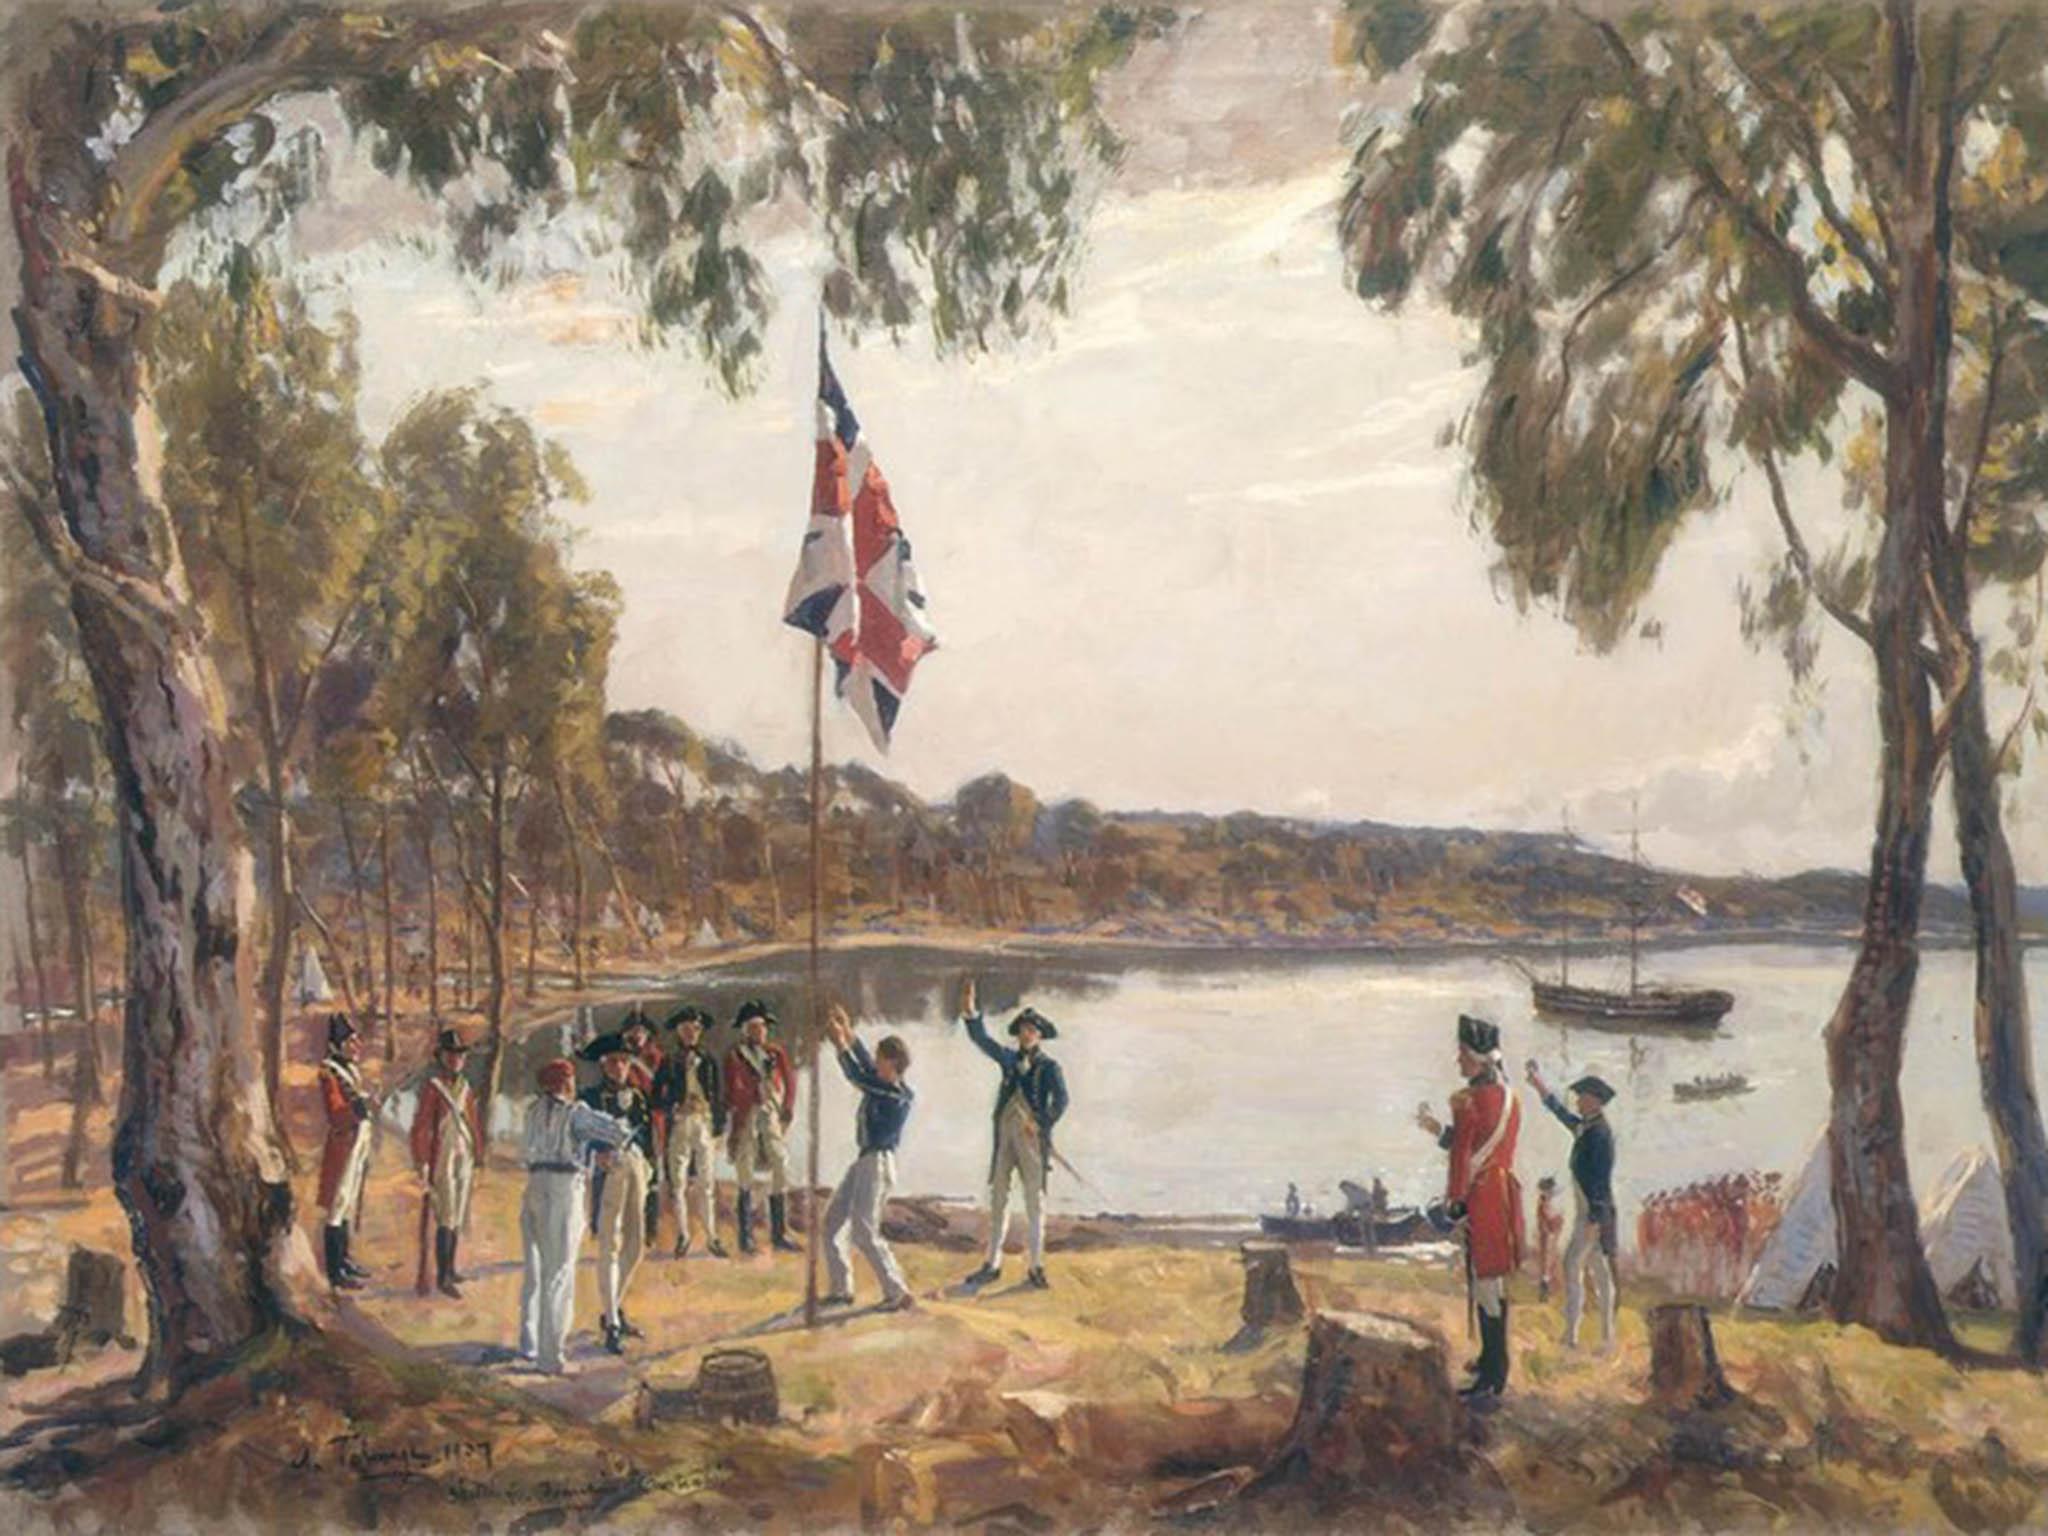 Captain Arthur Phillip claims New South Wales for the British Crown